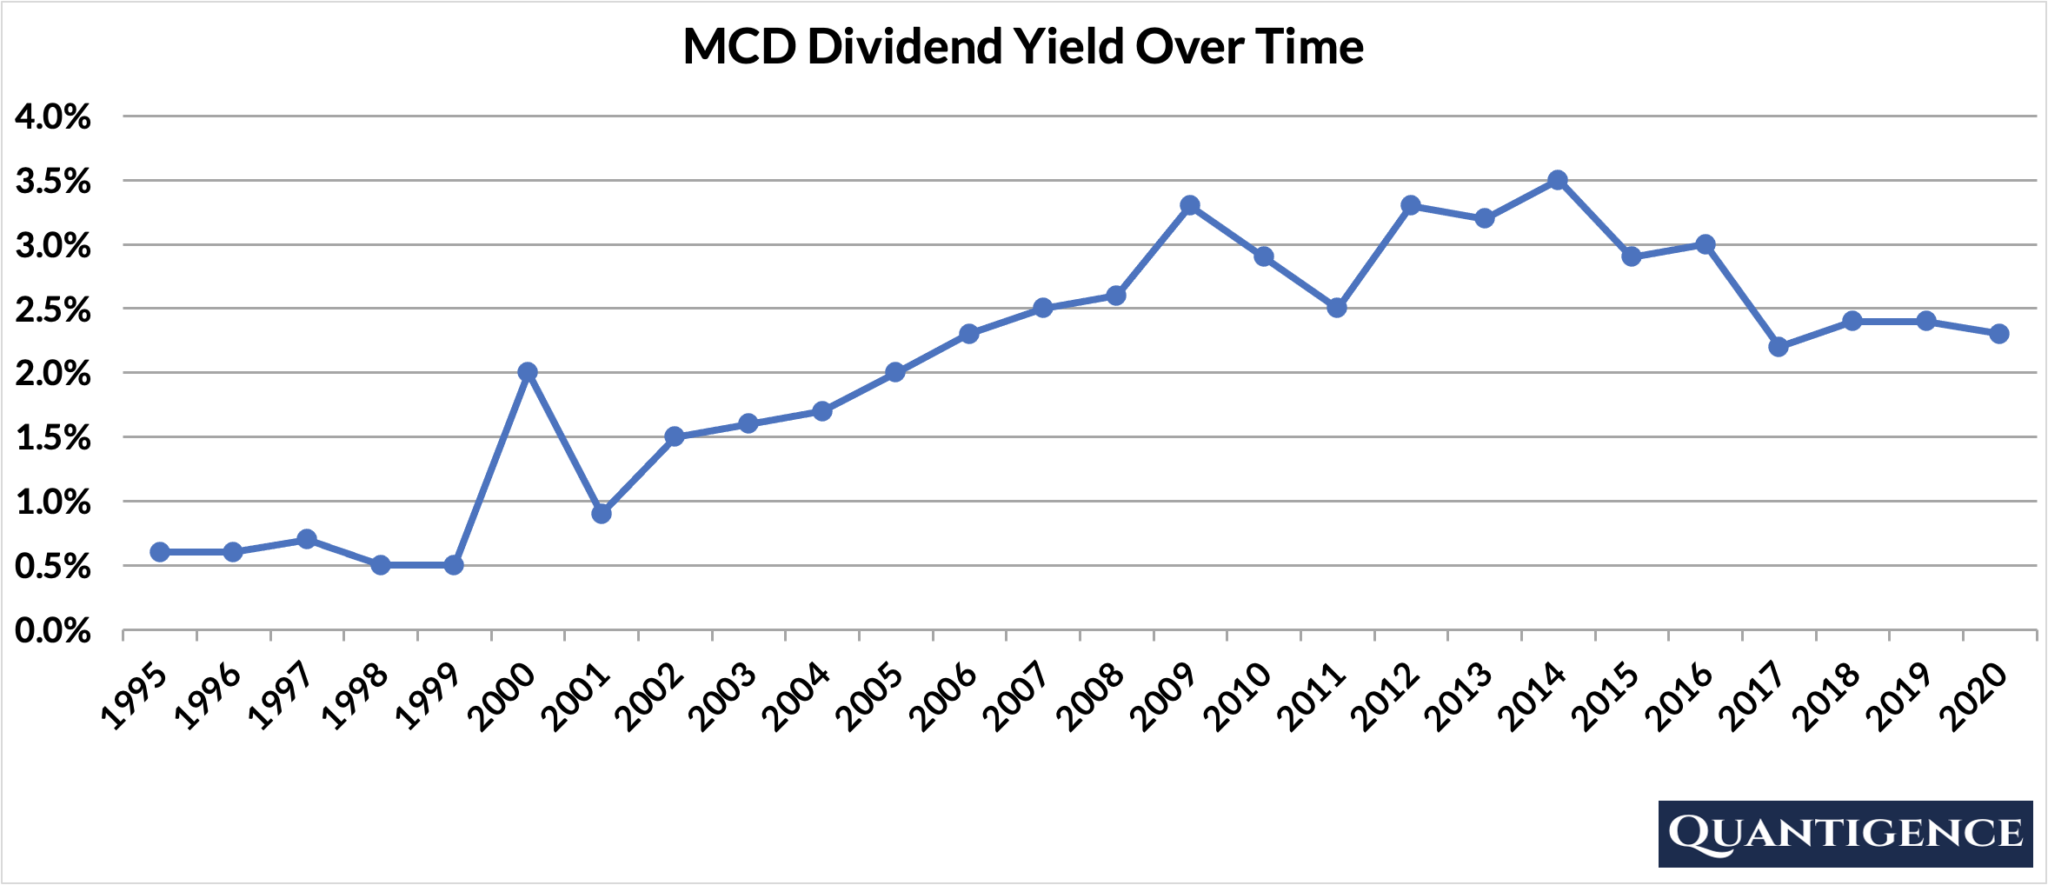 All About McDonald's Corporation's Dividend Quantigence A Dividend